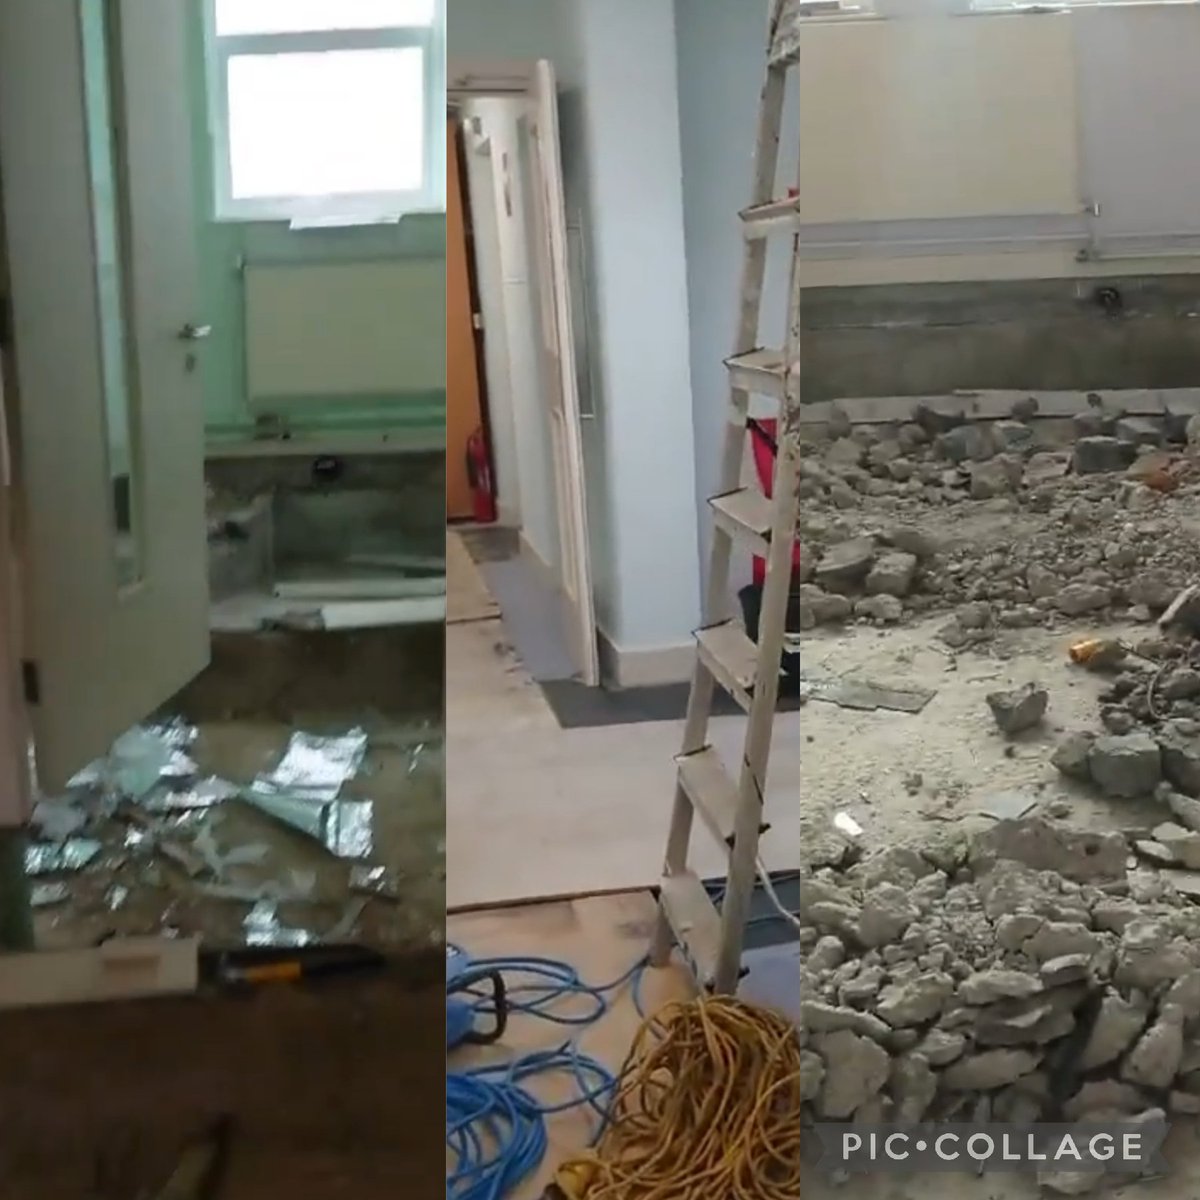 How is it possible that a youthreach in the heart of north Dublin has had 1/2 of the floors looking like this for over 6 months! 

Would this happen in a school serving children in Blackrock-I doubt it very much.  @NormaFoleyTD1 @Education_Ire no-one should go to school like this